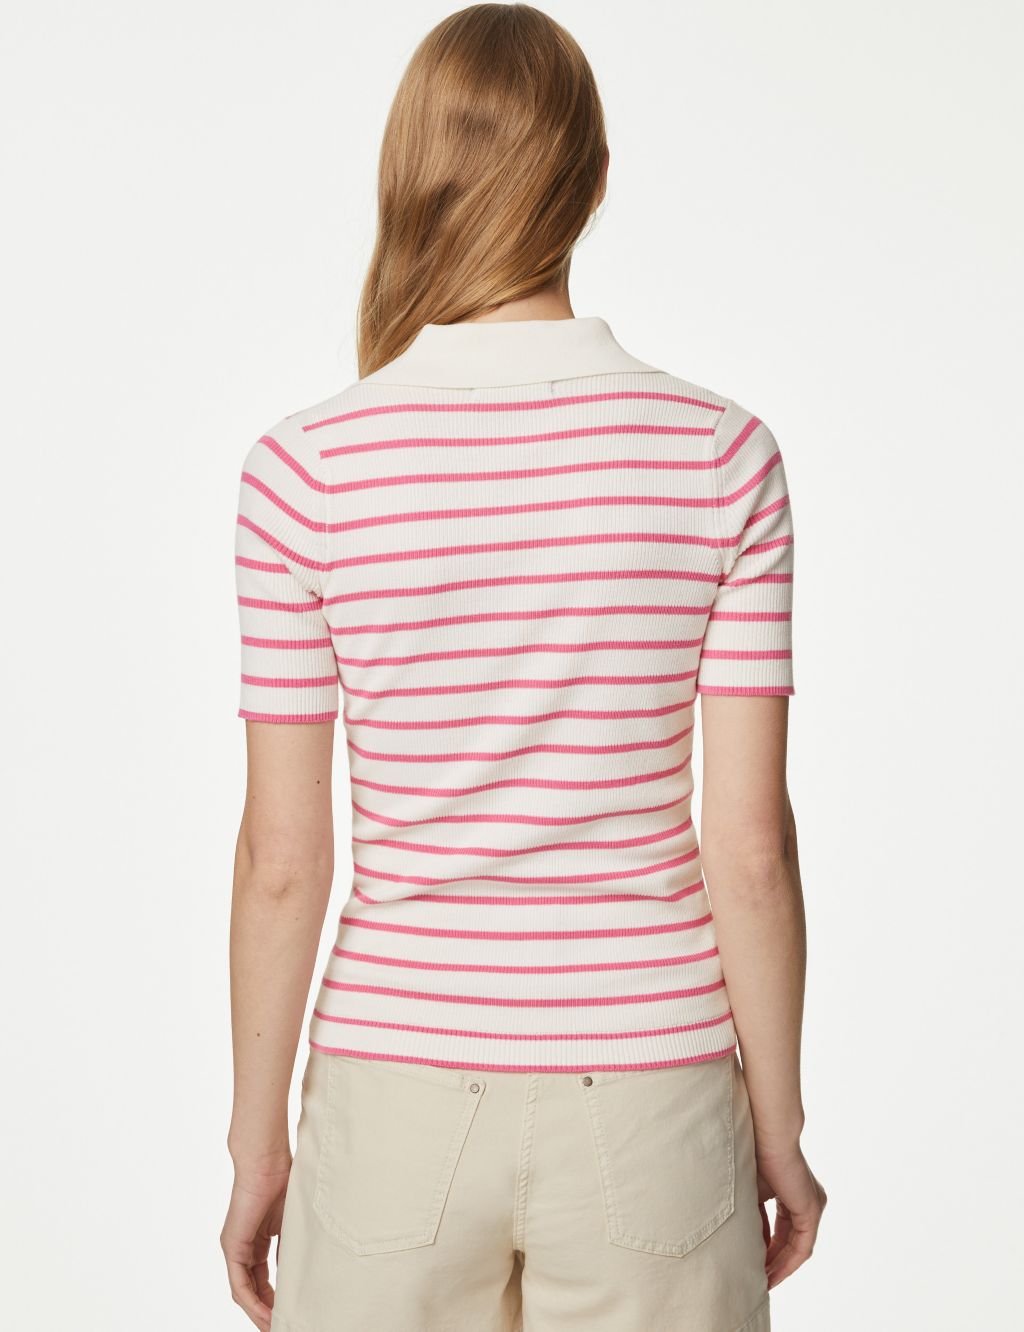 Cotton Rich Striped Collared Knitted Top image 4